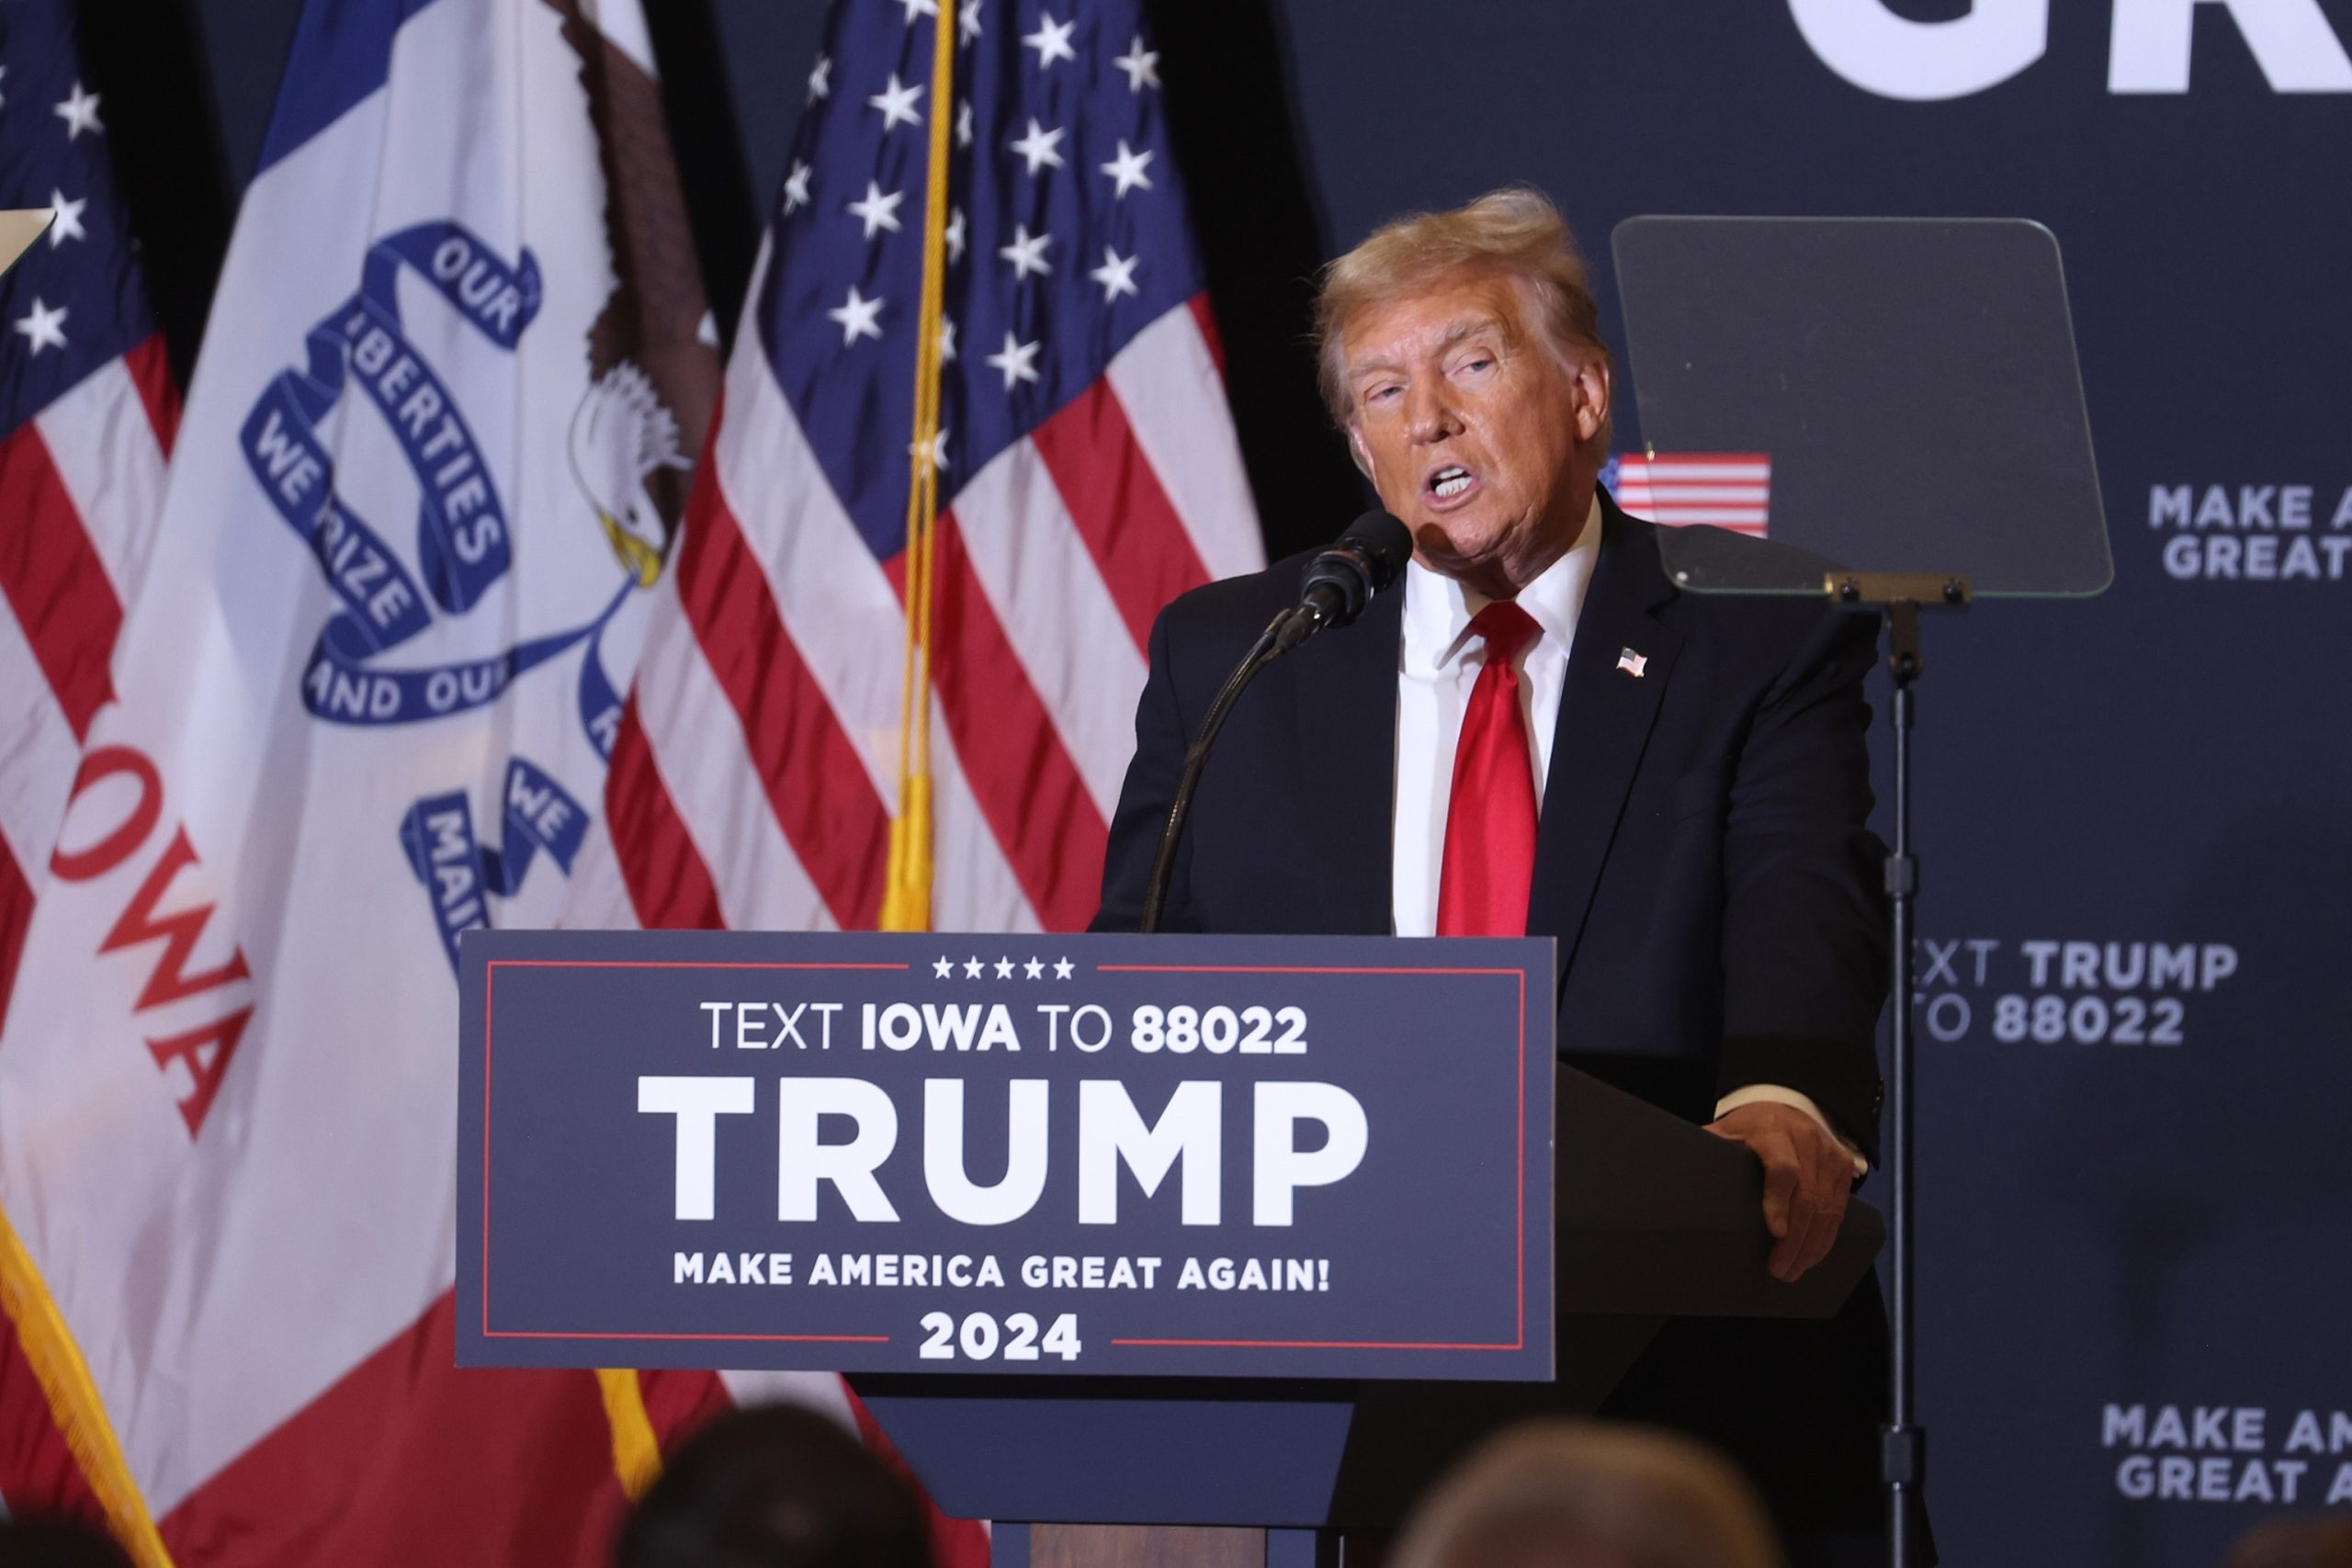 Michigan Court of Appeals affirms Trump's eligibility for 2024 GOP primary ballot